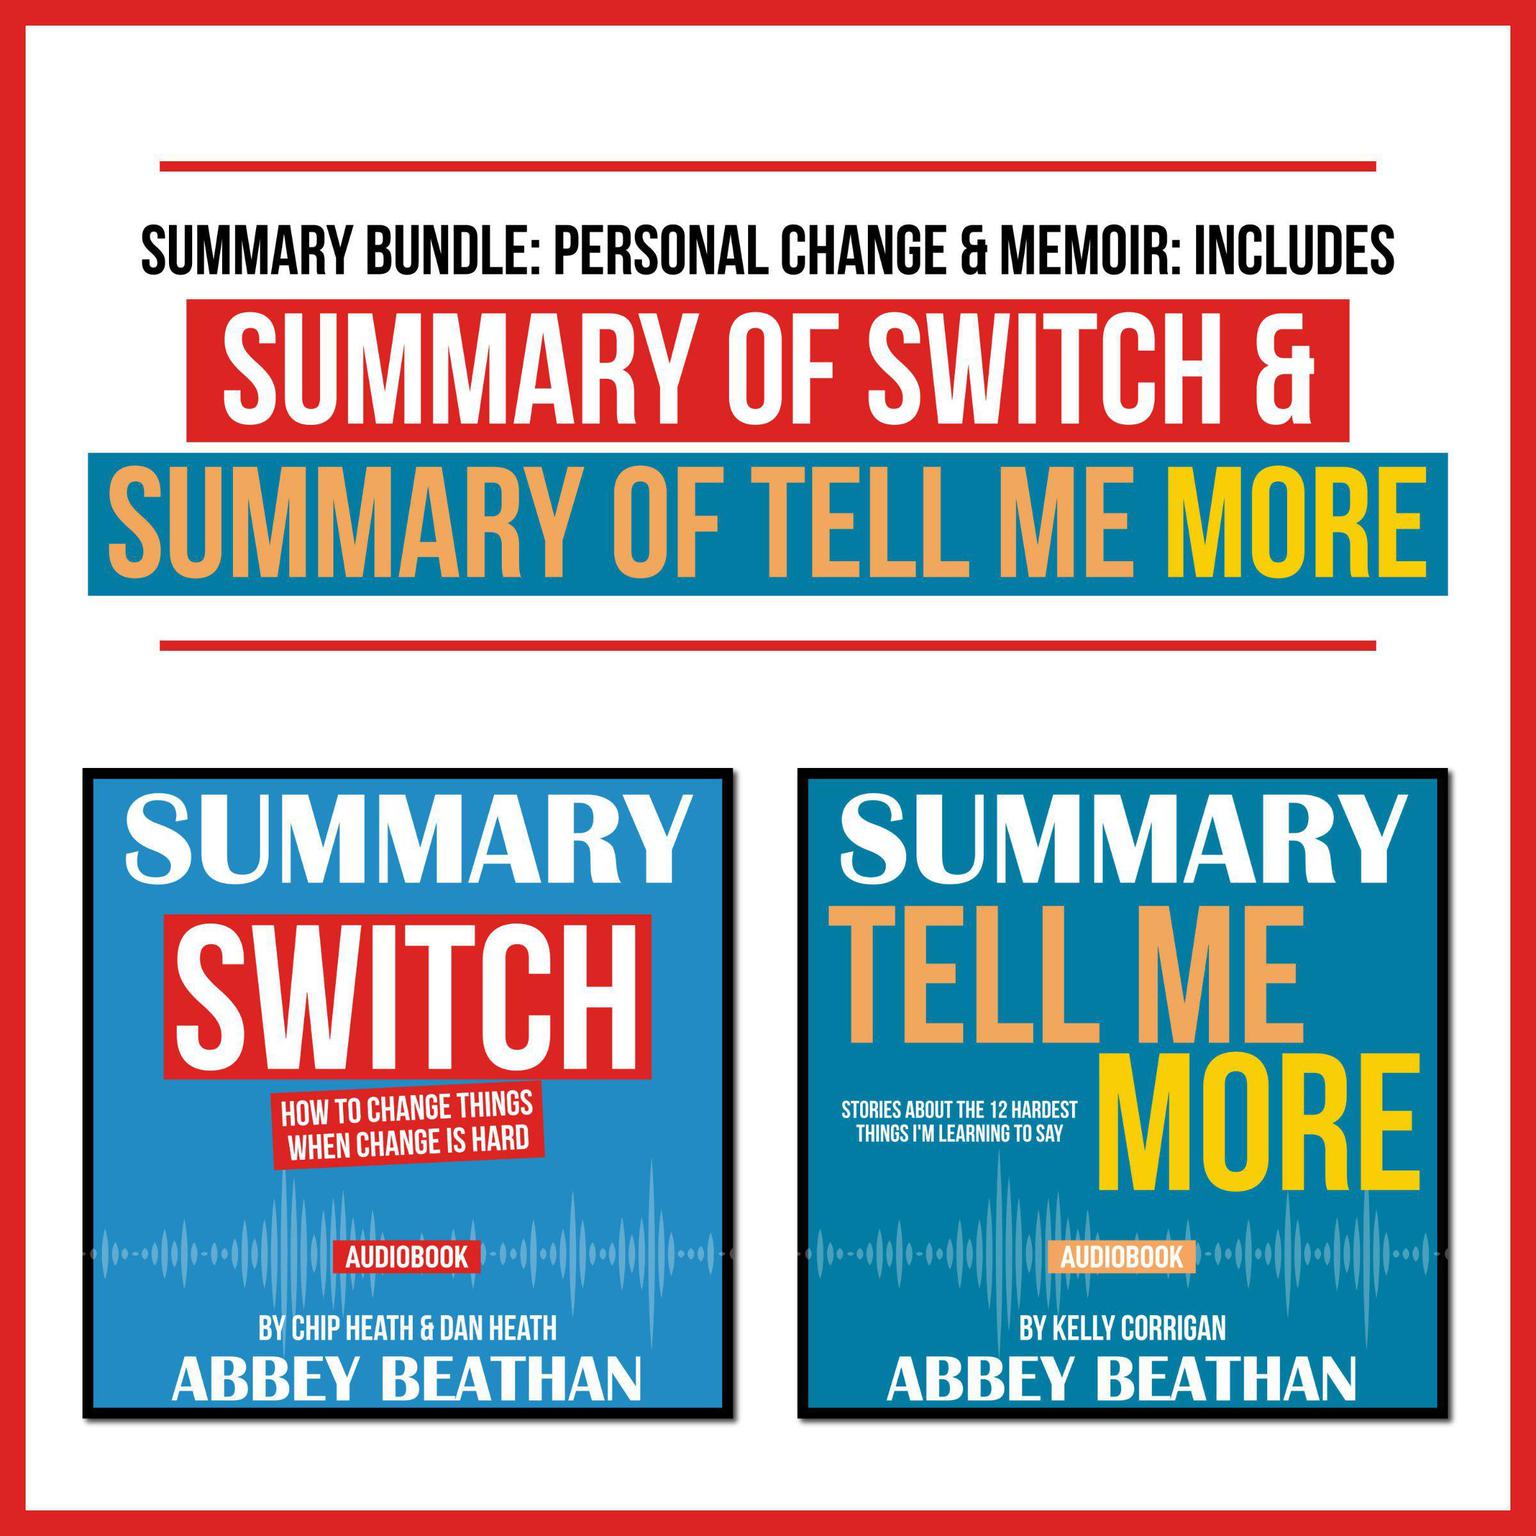 Summary Bundle: Personal Change & Memoir: Includes Summary of Switch & Summary of Tell Me More Audiobook, by Abbey Beathan